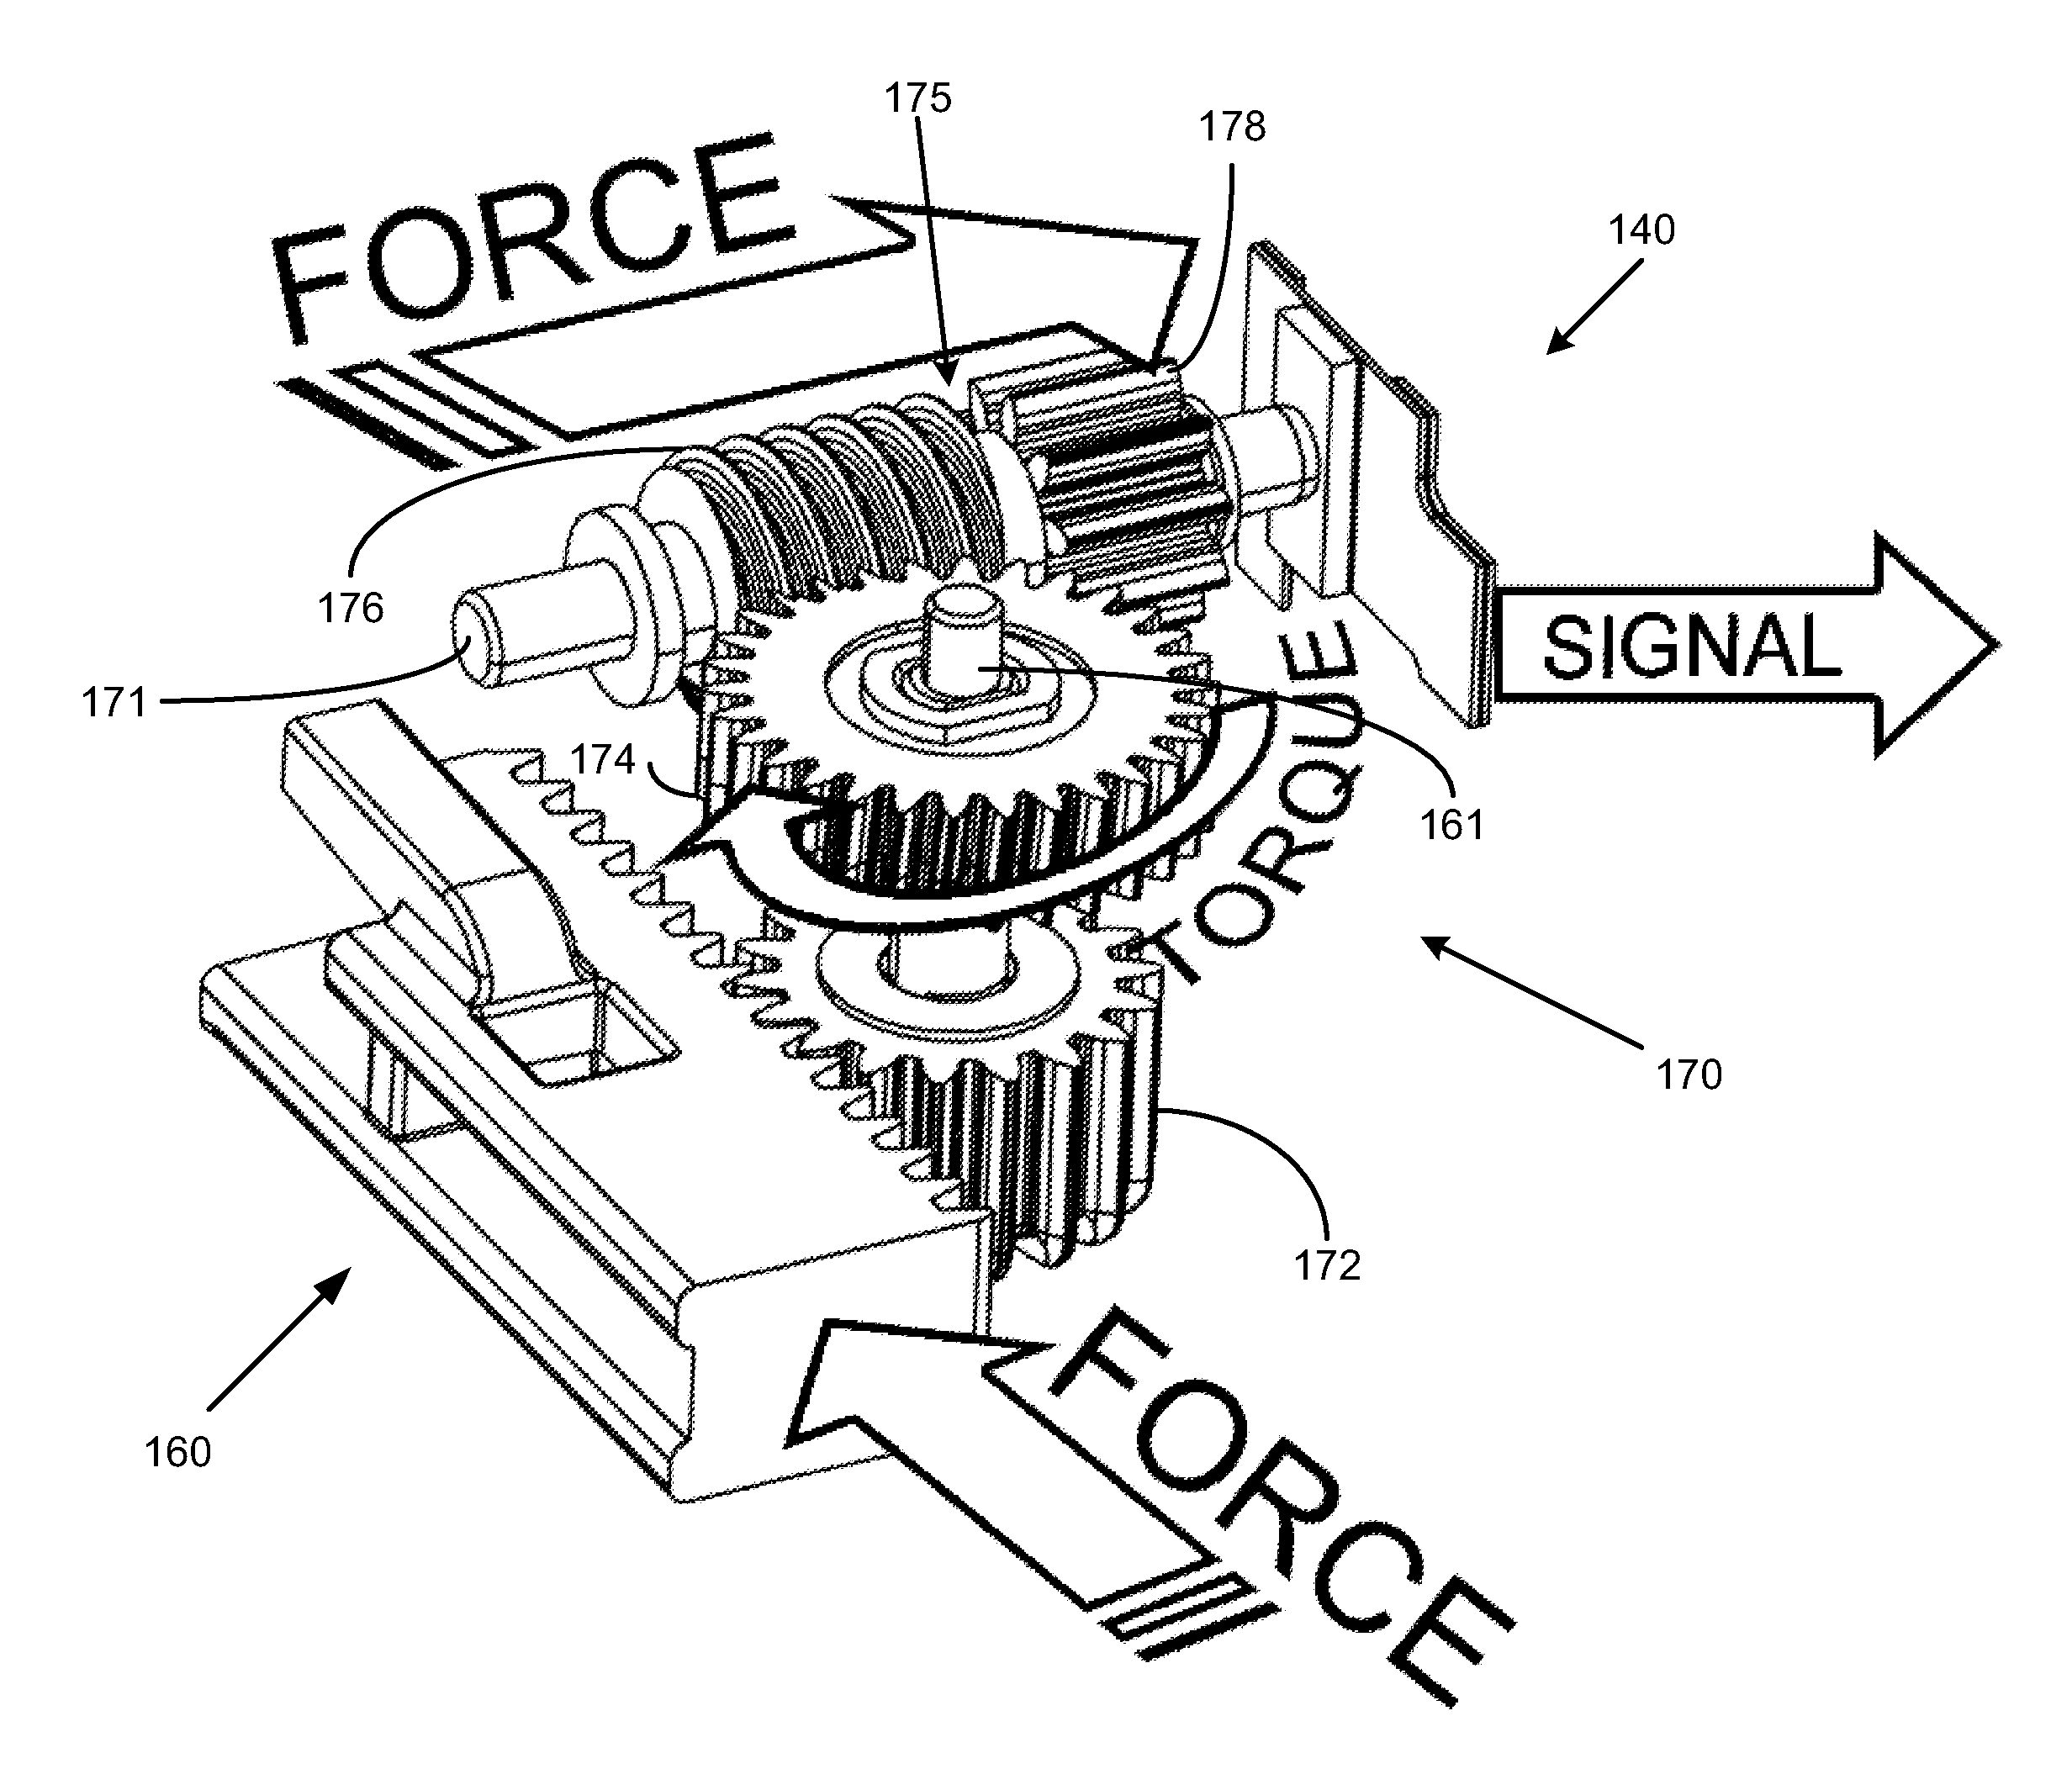 Engagement and sensing systems and methods